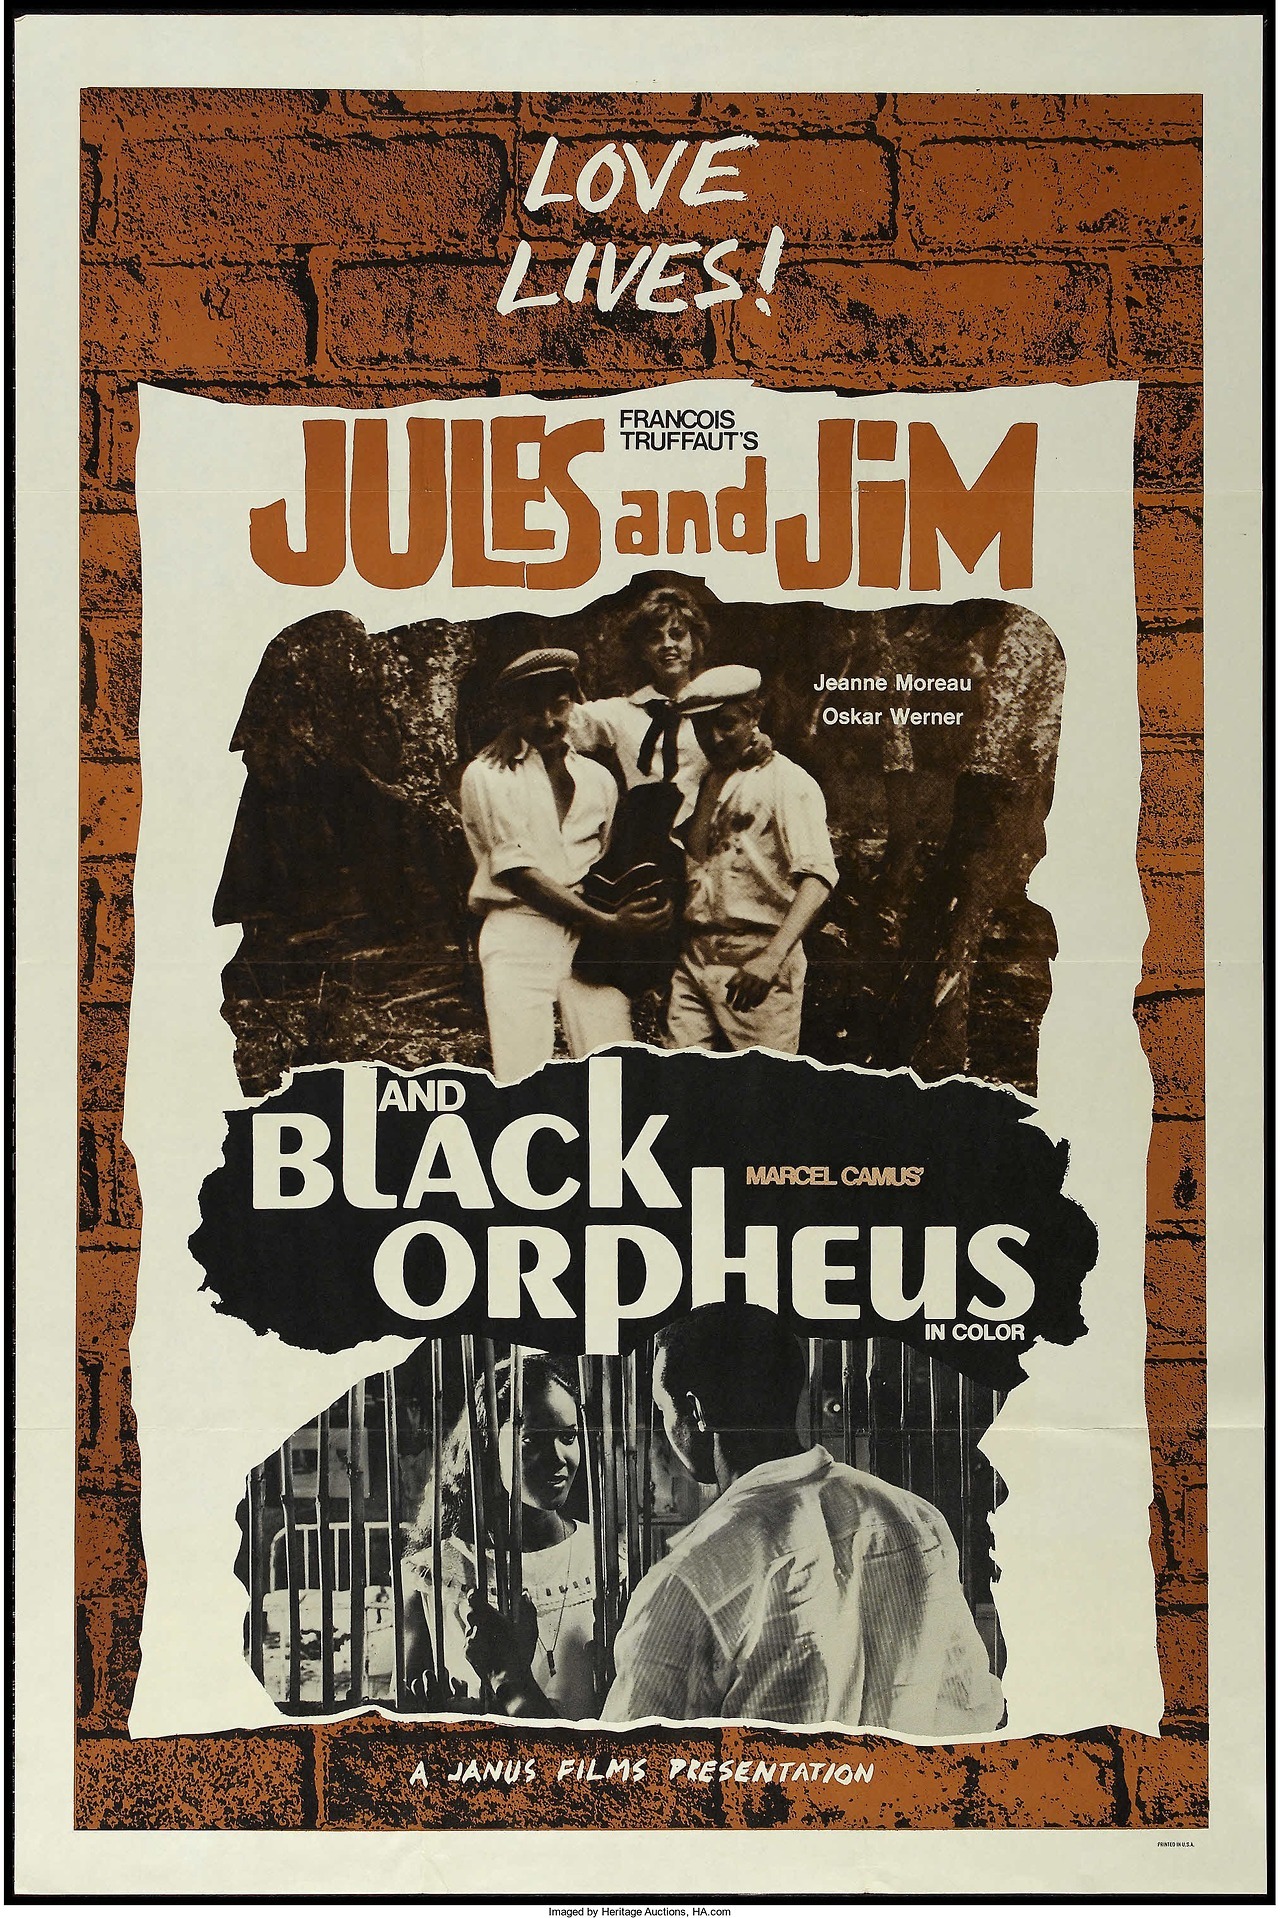 The Poster Boys - Early Janus Films posters, before the 